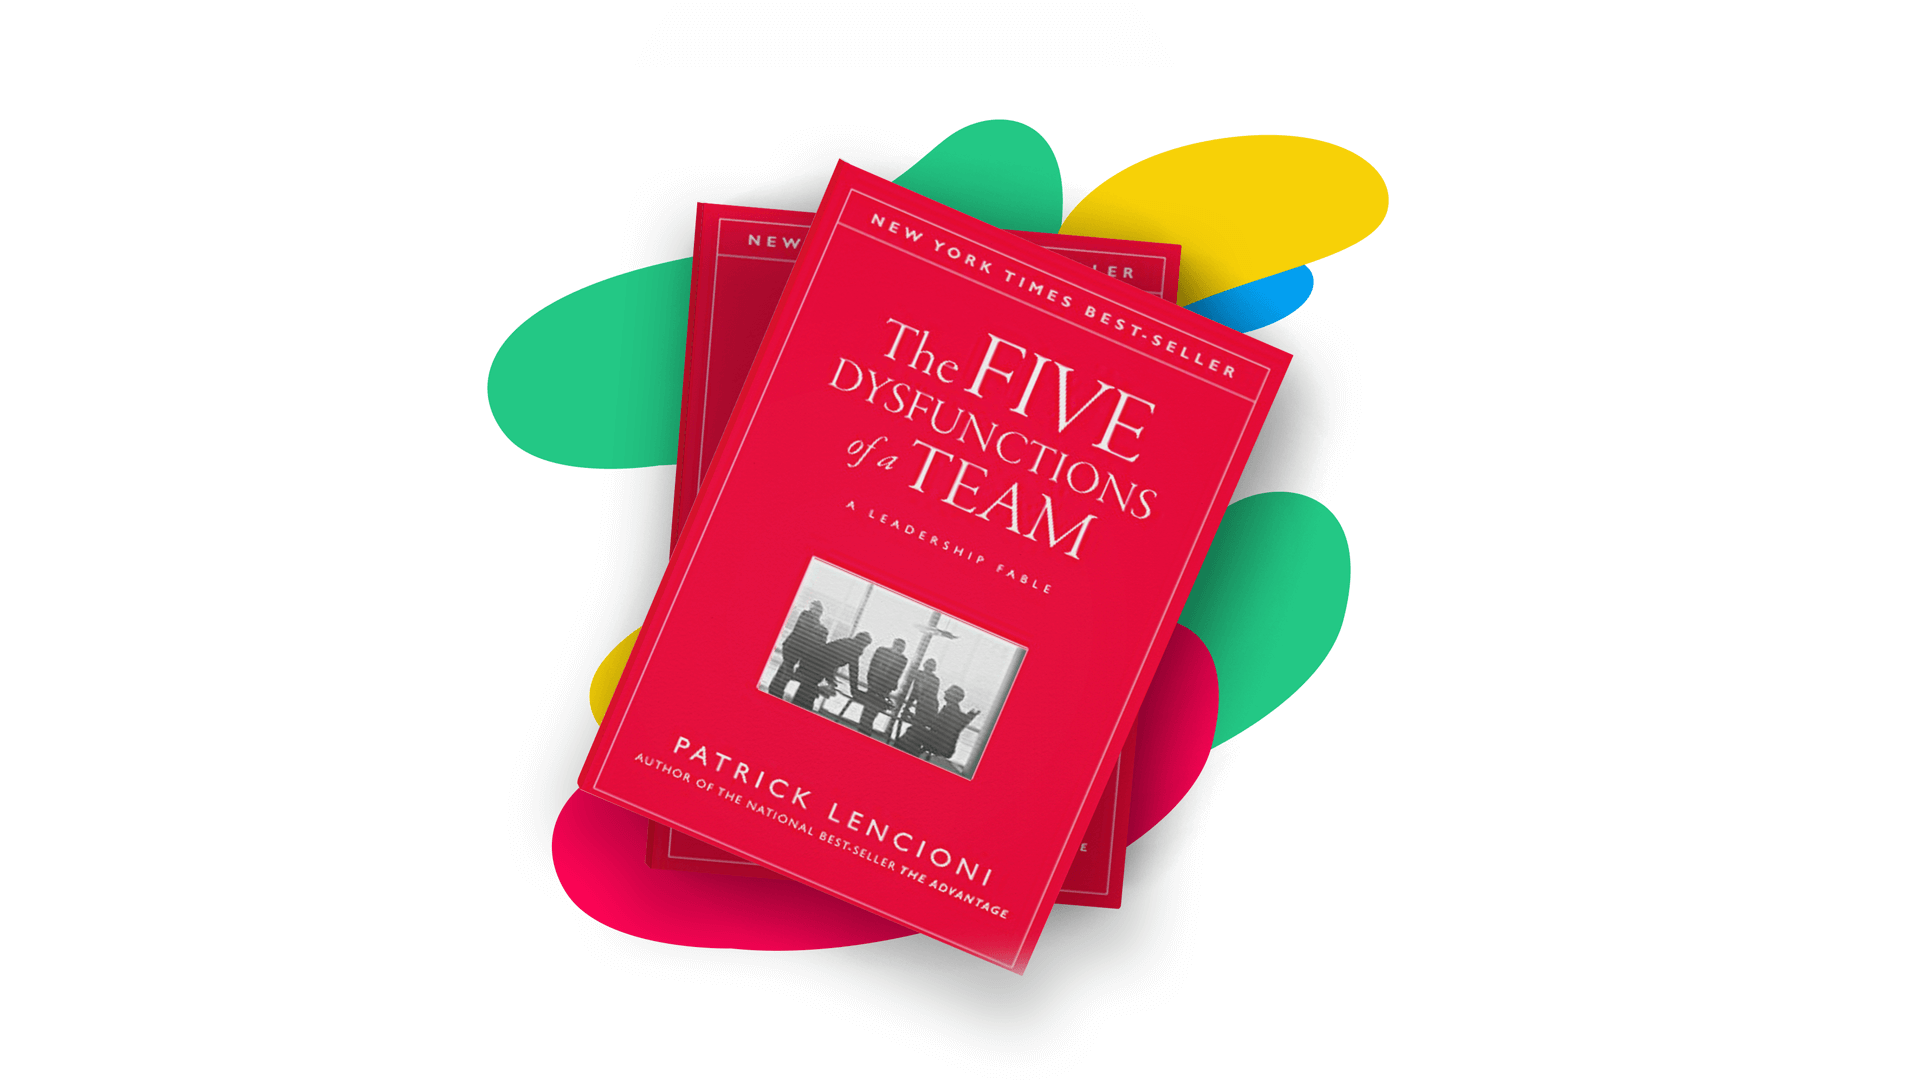 Best Project Management Books: The Five Dysfunctions of a Team